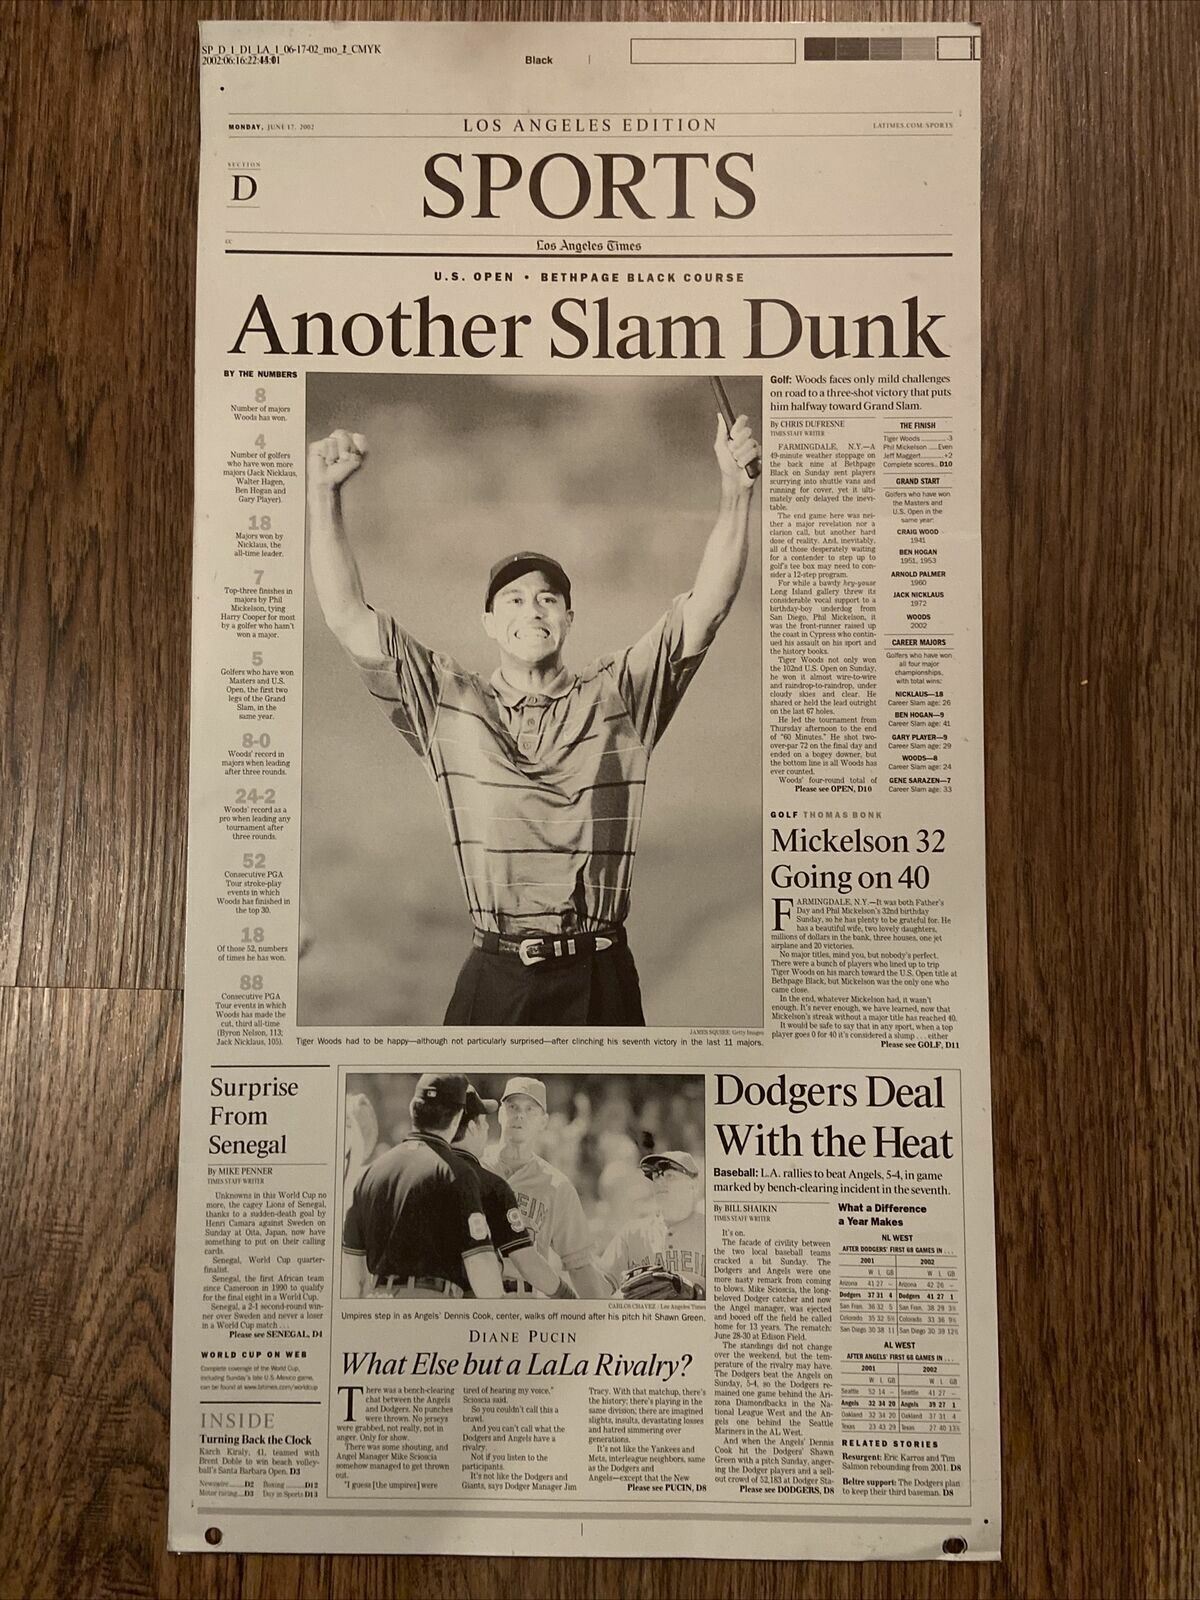 Another Slam Dunk LA Times June 17, 2002 Newspaper Print  Plate Tiger Woods 1/1